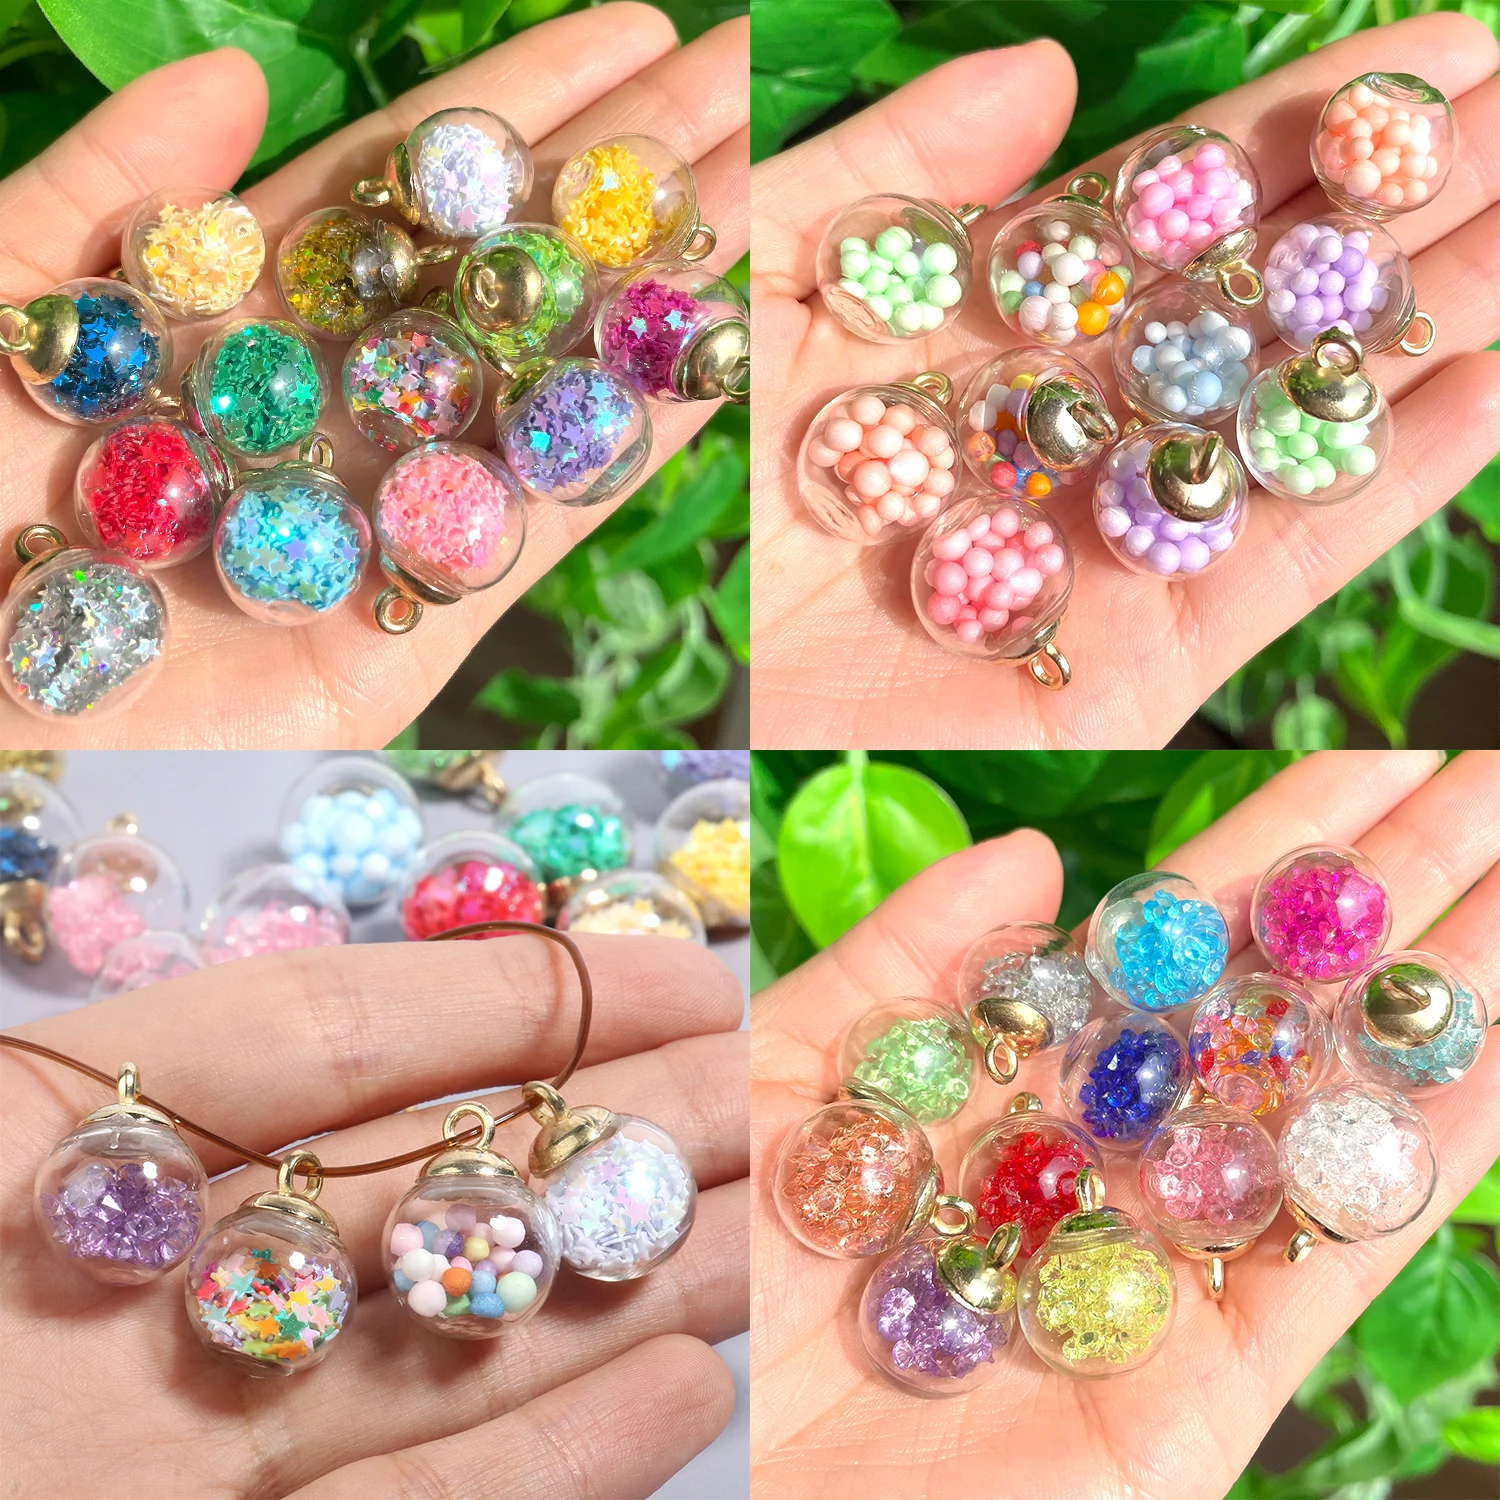 21x16mm Transparent Glass Ball Charms Pendant with Tiny Rhinestones Star Sequins Foam for Necklace Jewelry Earring Making DIY